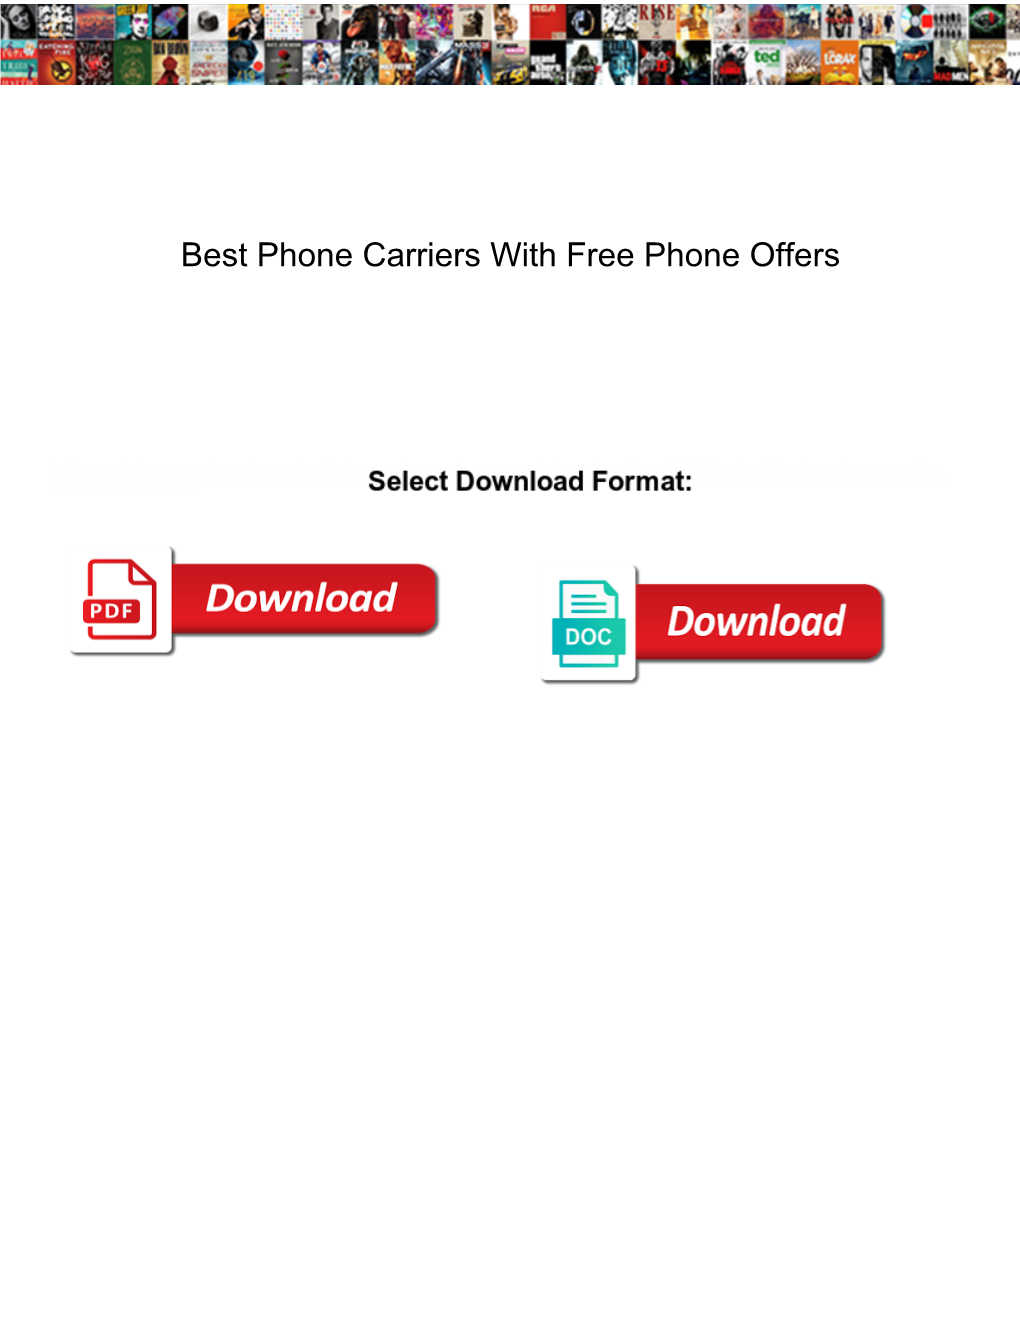 Best Phone Carriers with Free Phone Offers